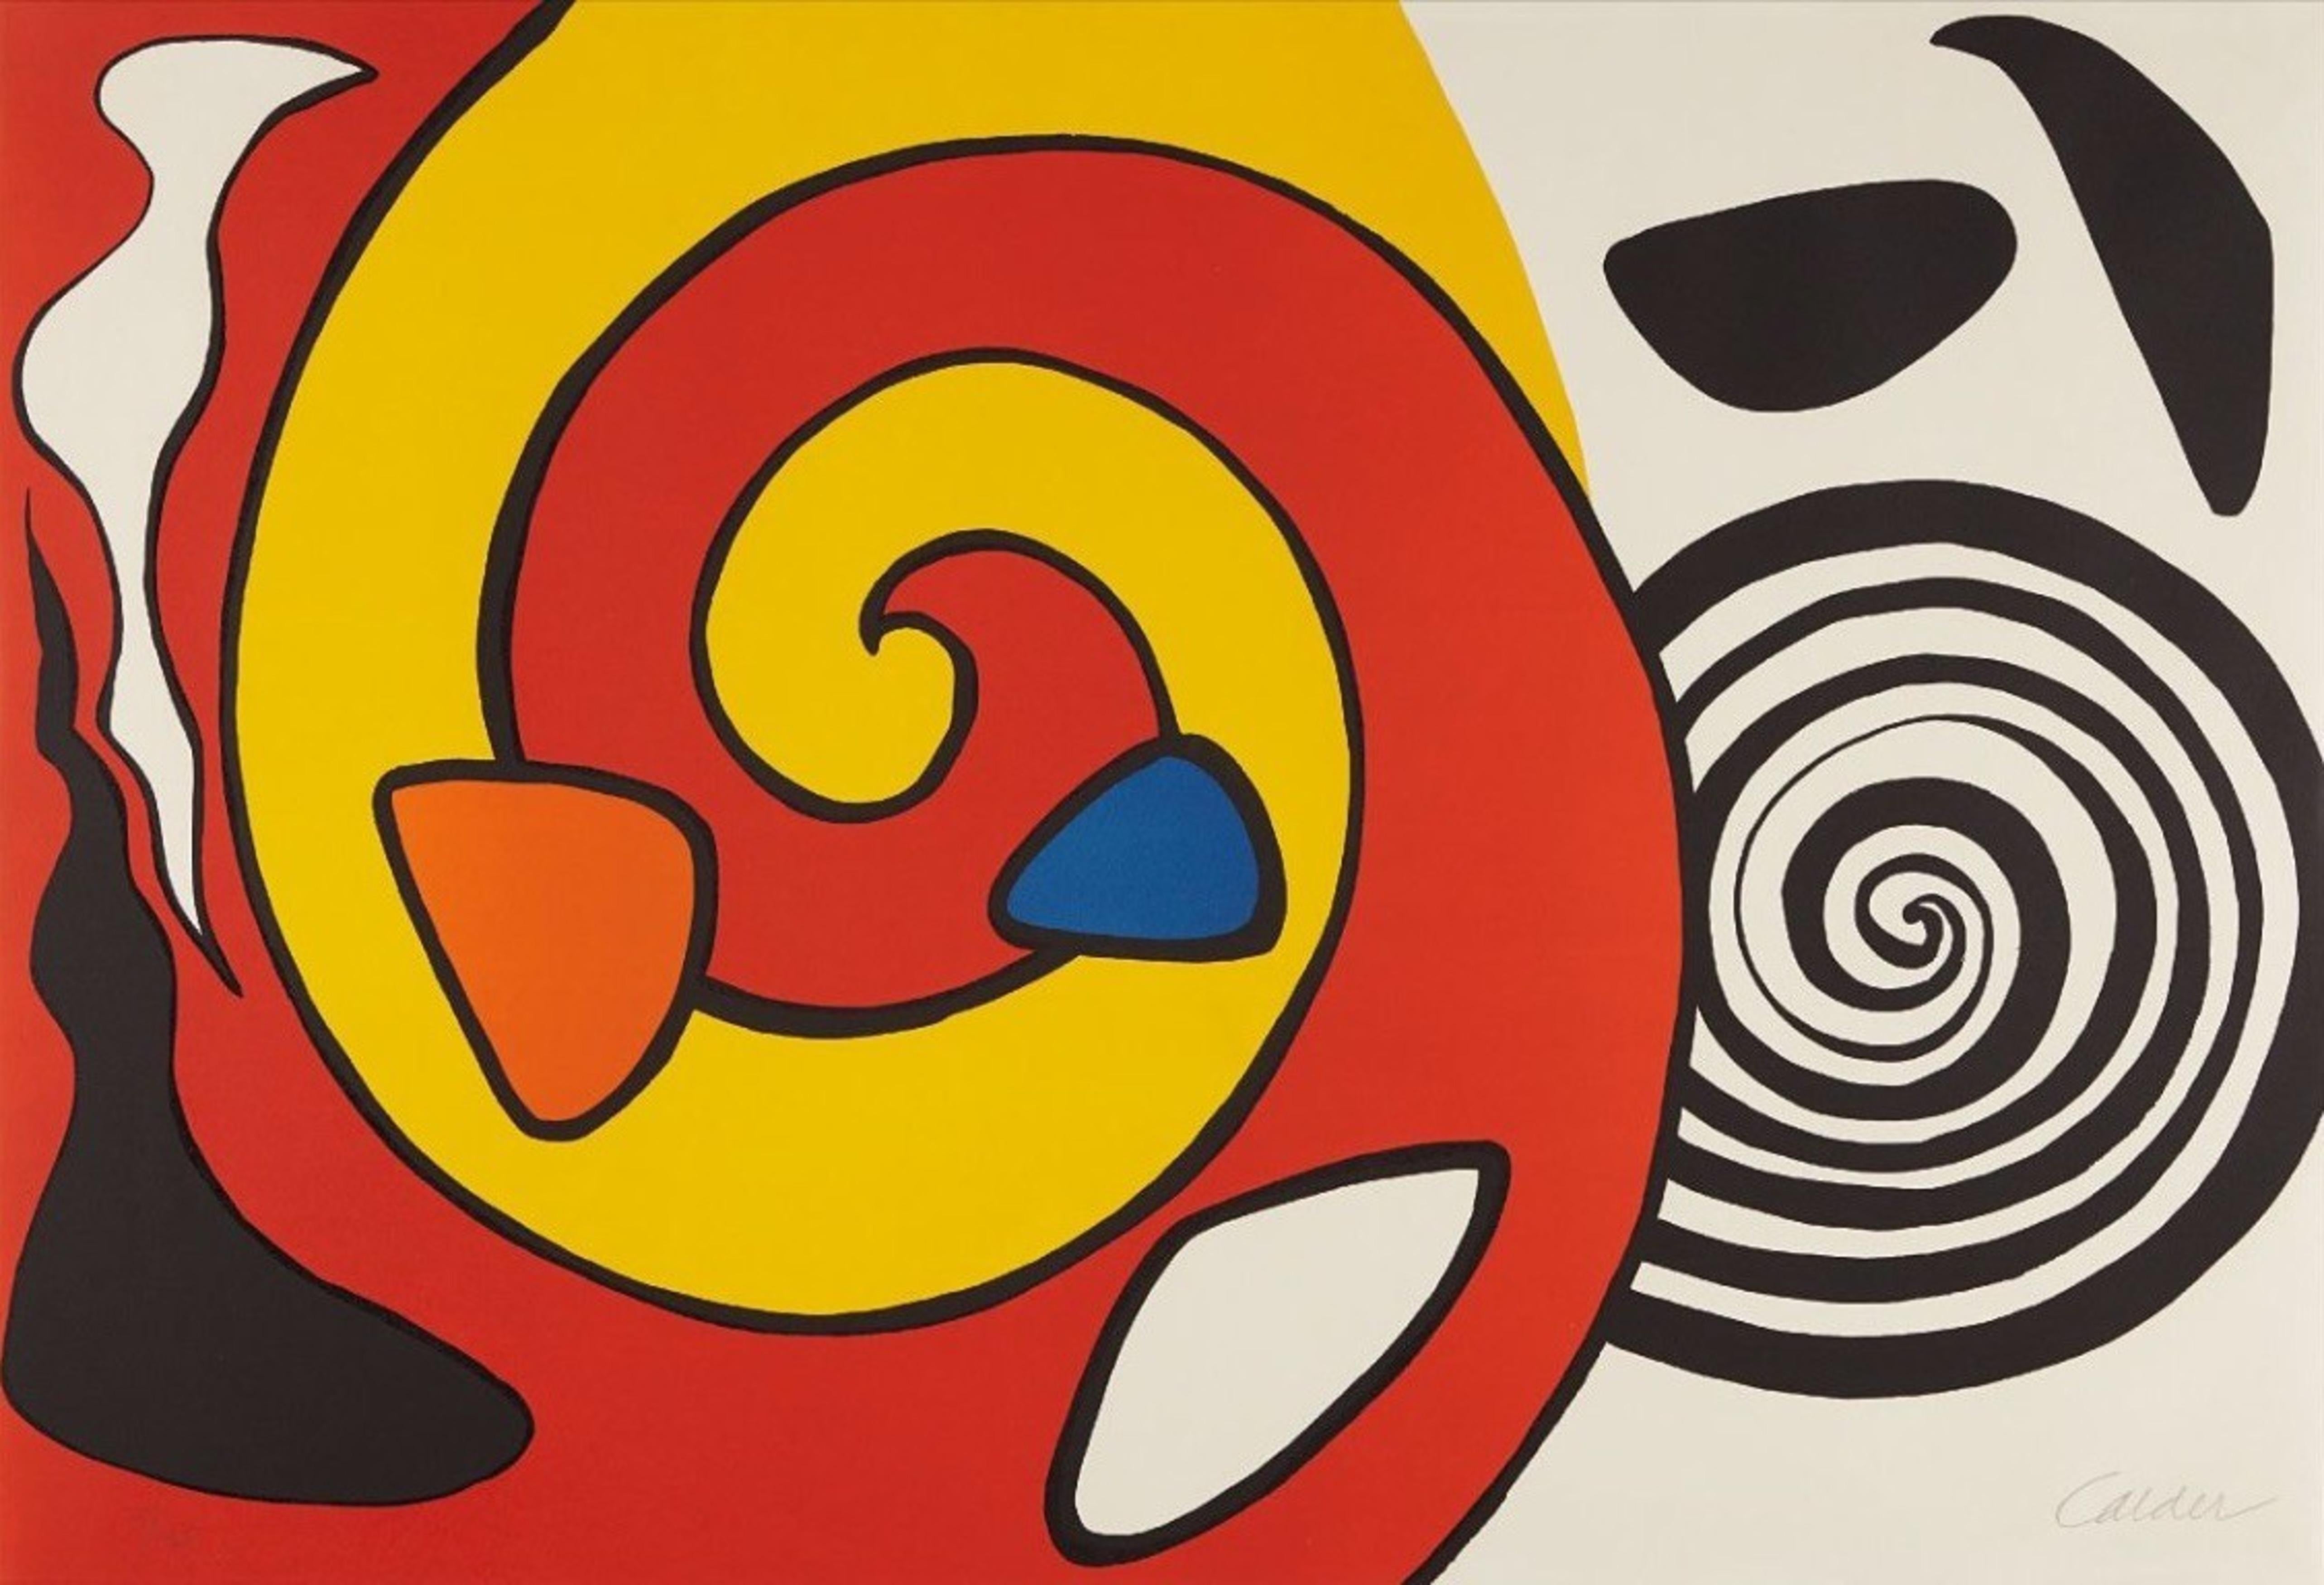 Untitled (Spirals and Forms) - Print by Alexander Calder